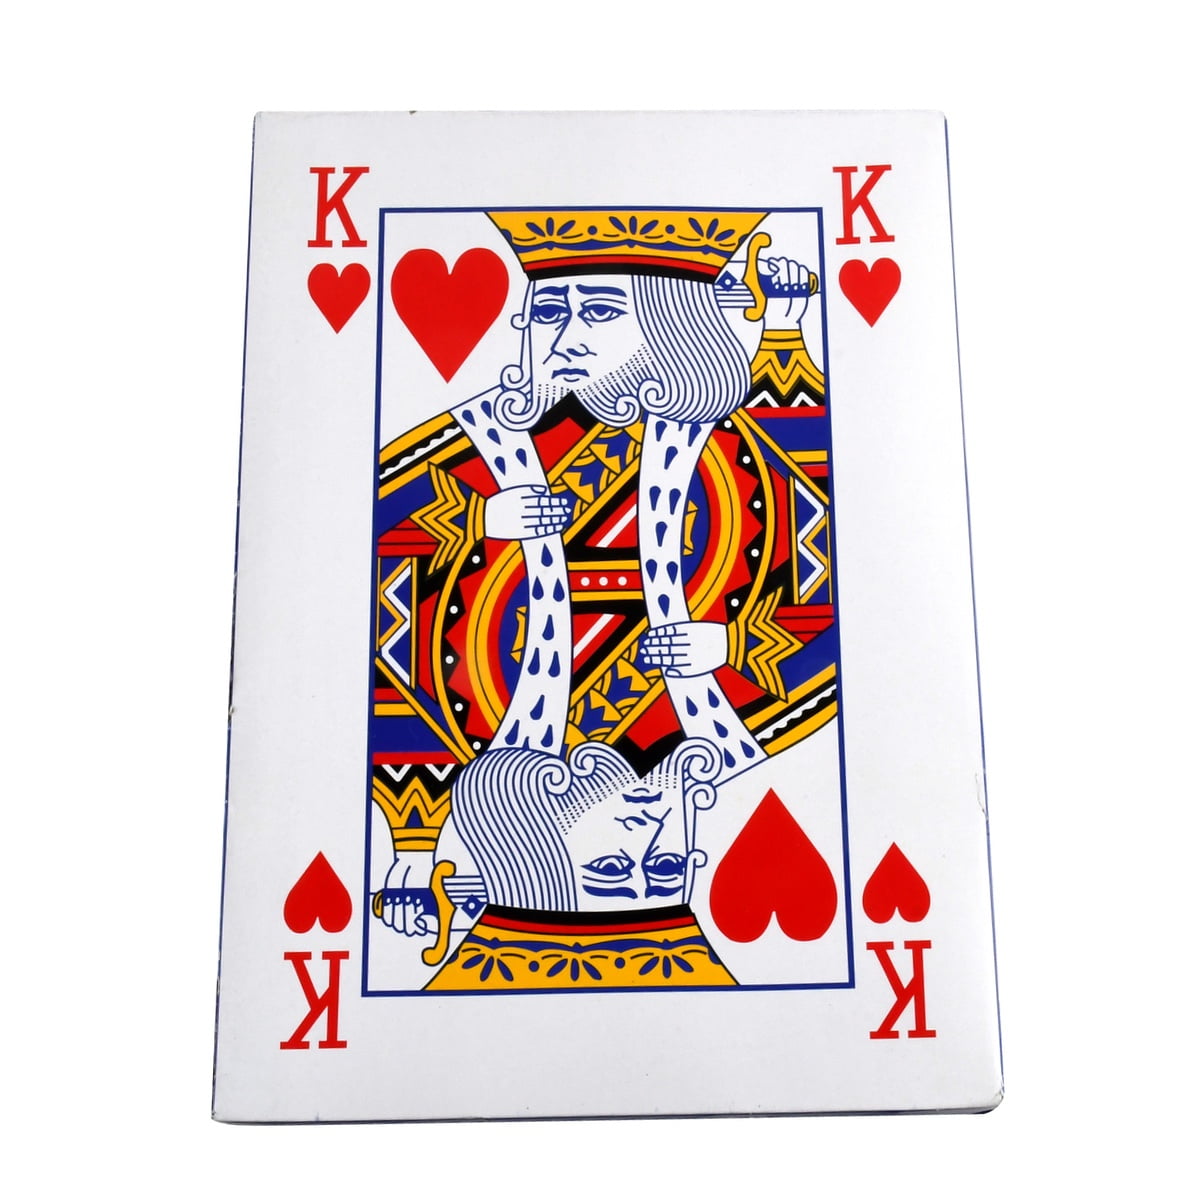 Details about   Aviator Jumbo Index Red Deck Poker Playing Cards Magic Tricks Original Box New 